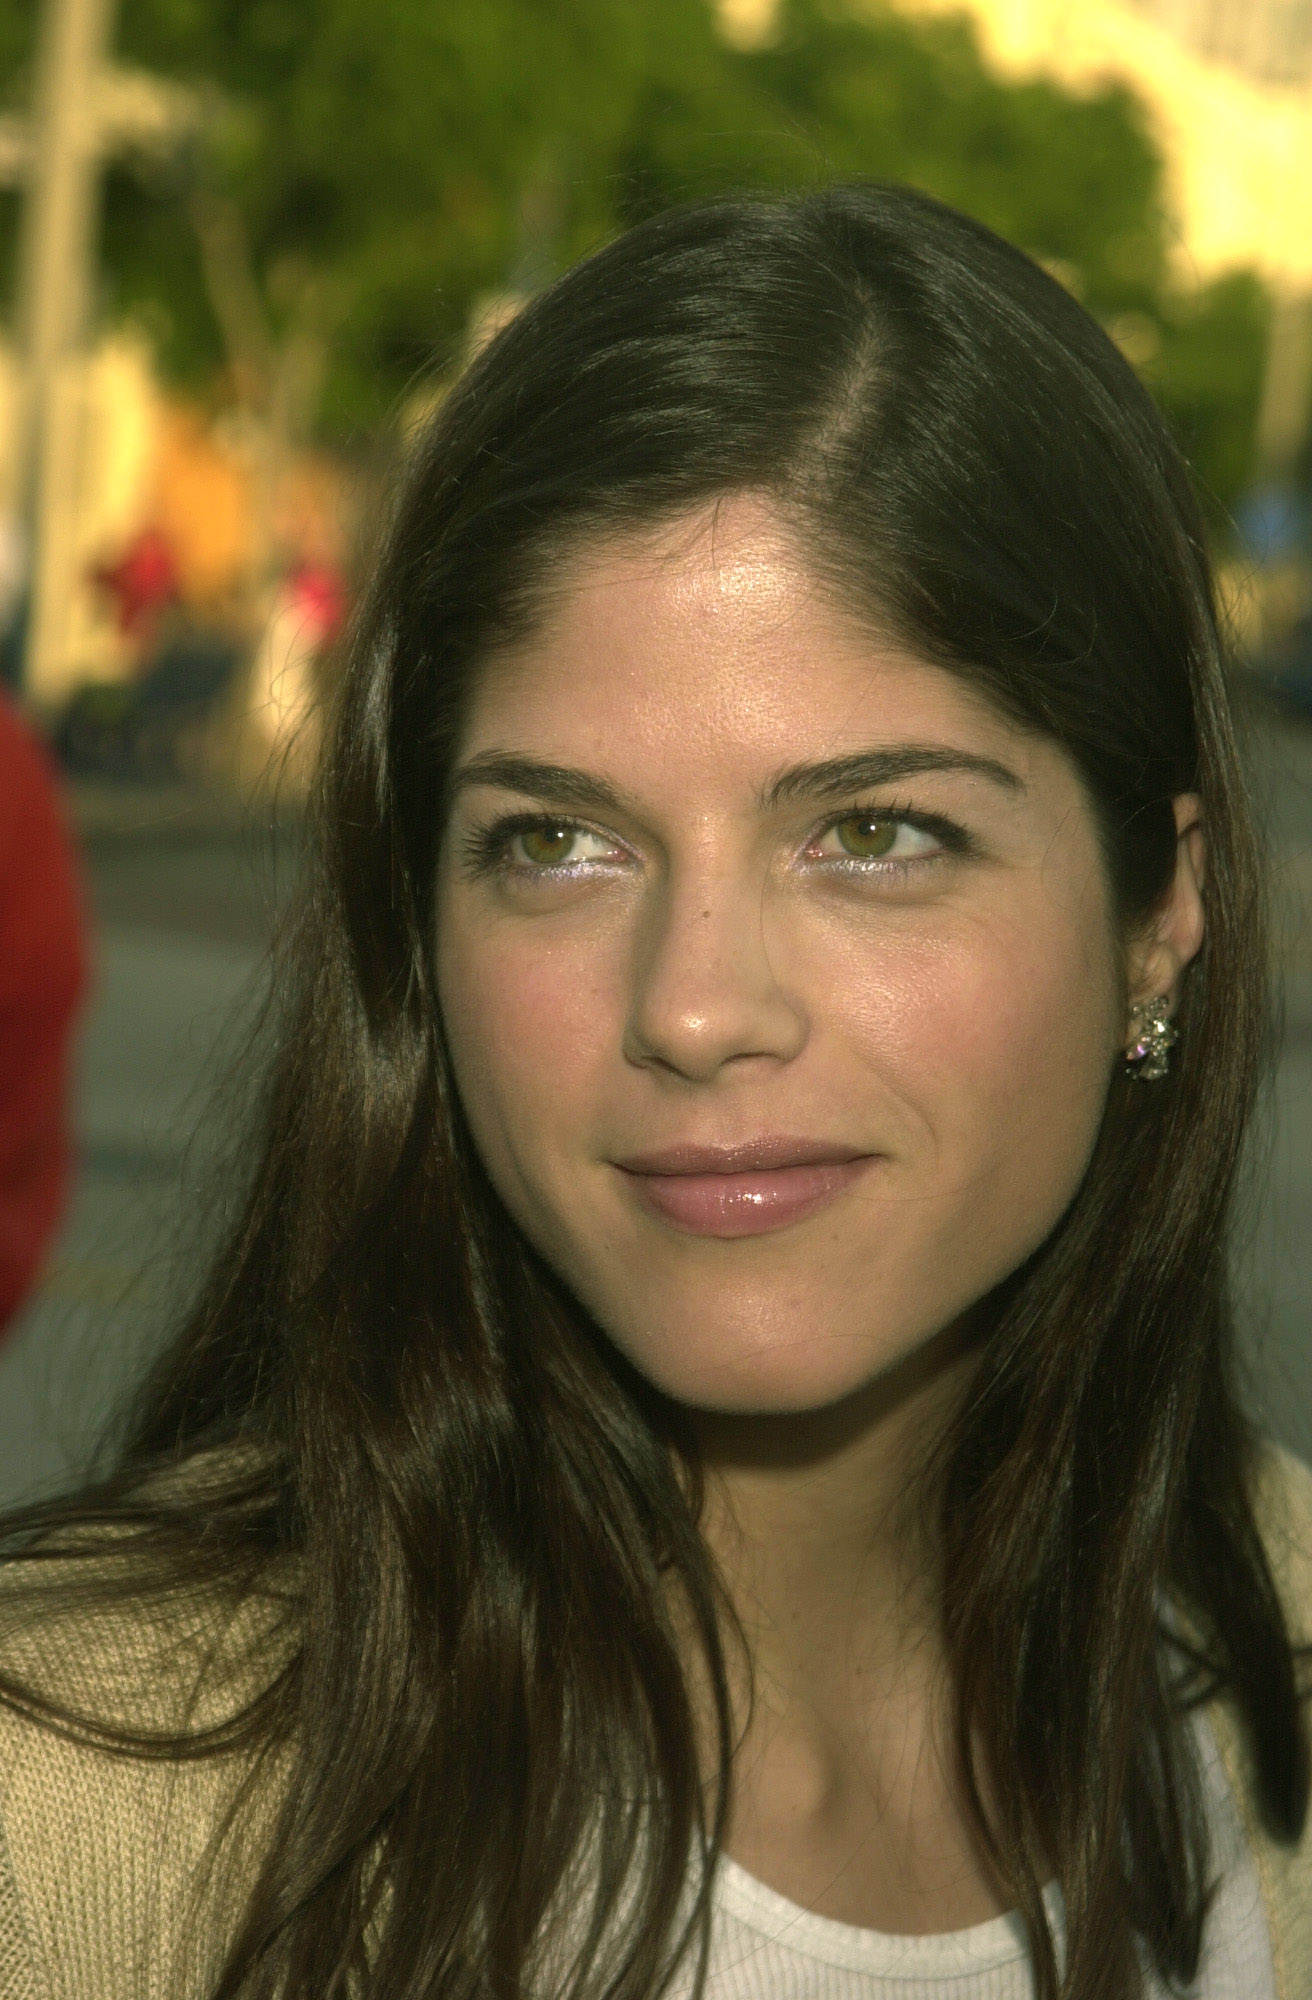 Selma Blair was in attendance at the premiere of Howard Deutch's "The Replacements" | Source: Getty Images